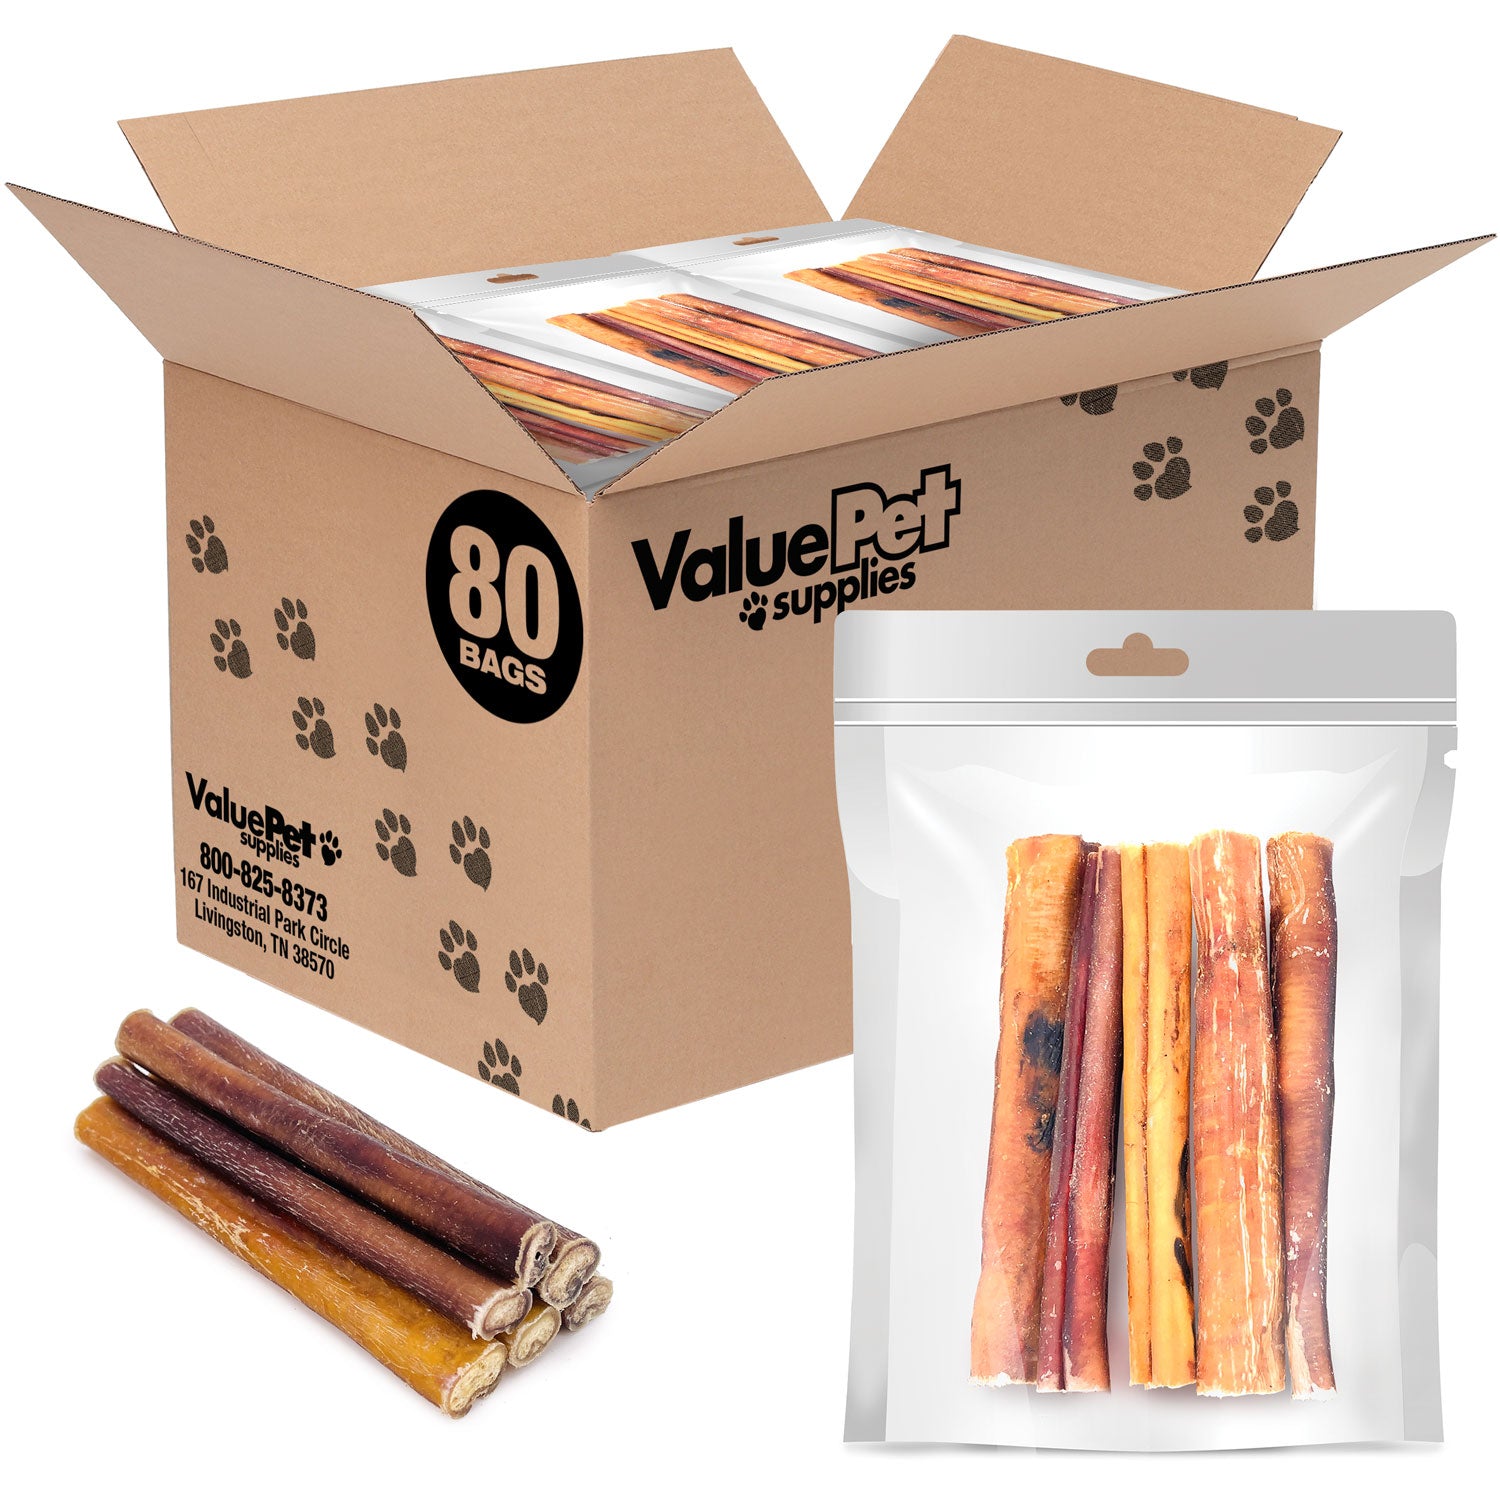 ValueBull Bully Sticks for Dogs, Thick 6 Inch, 400 Count RESALE PACKS (80 x 5 Count)